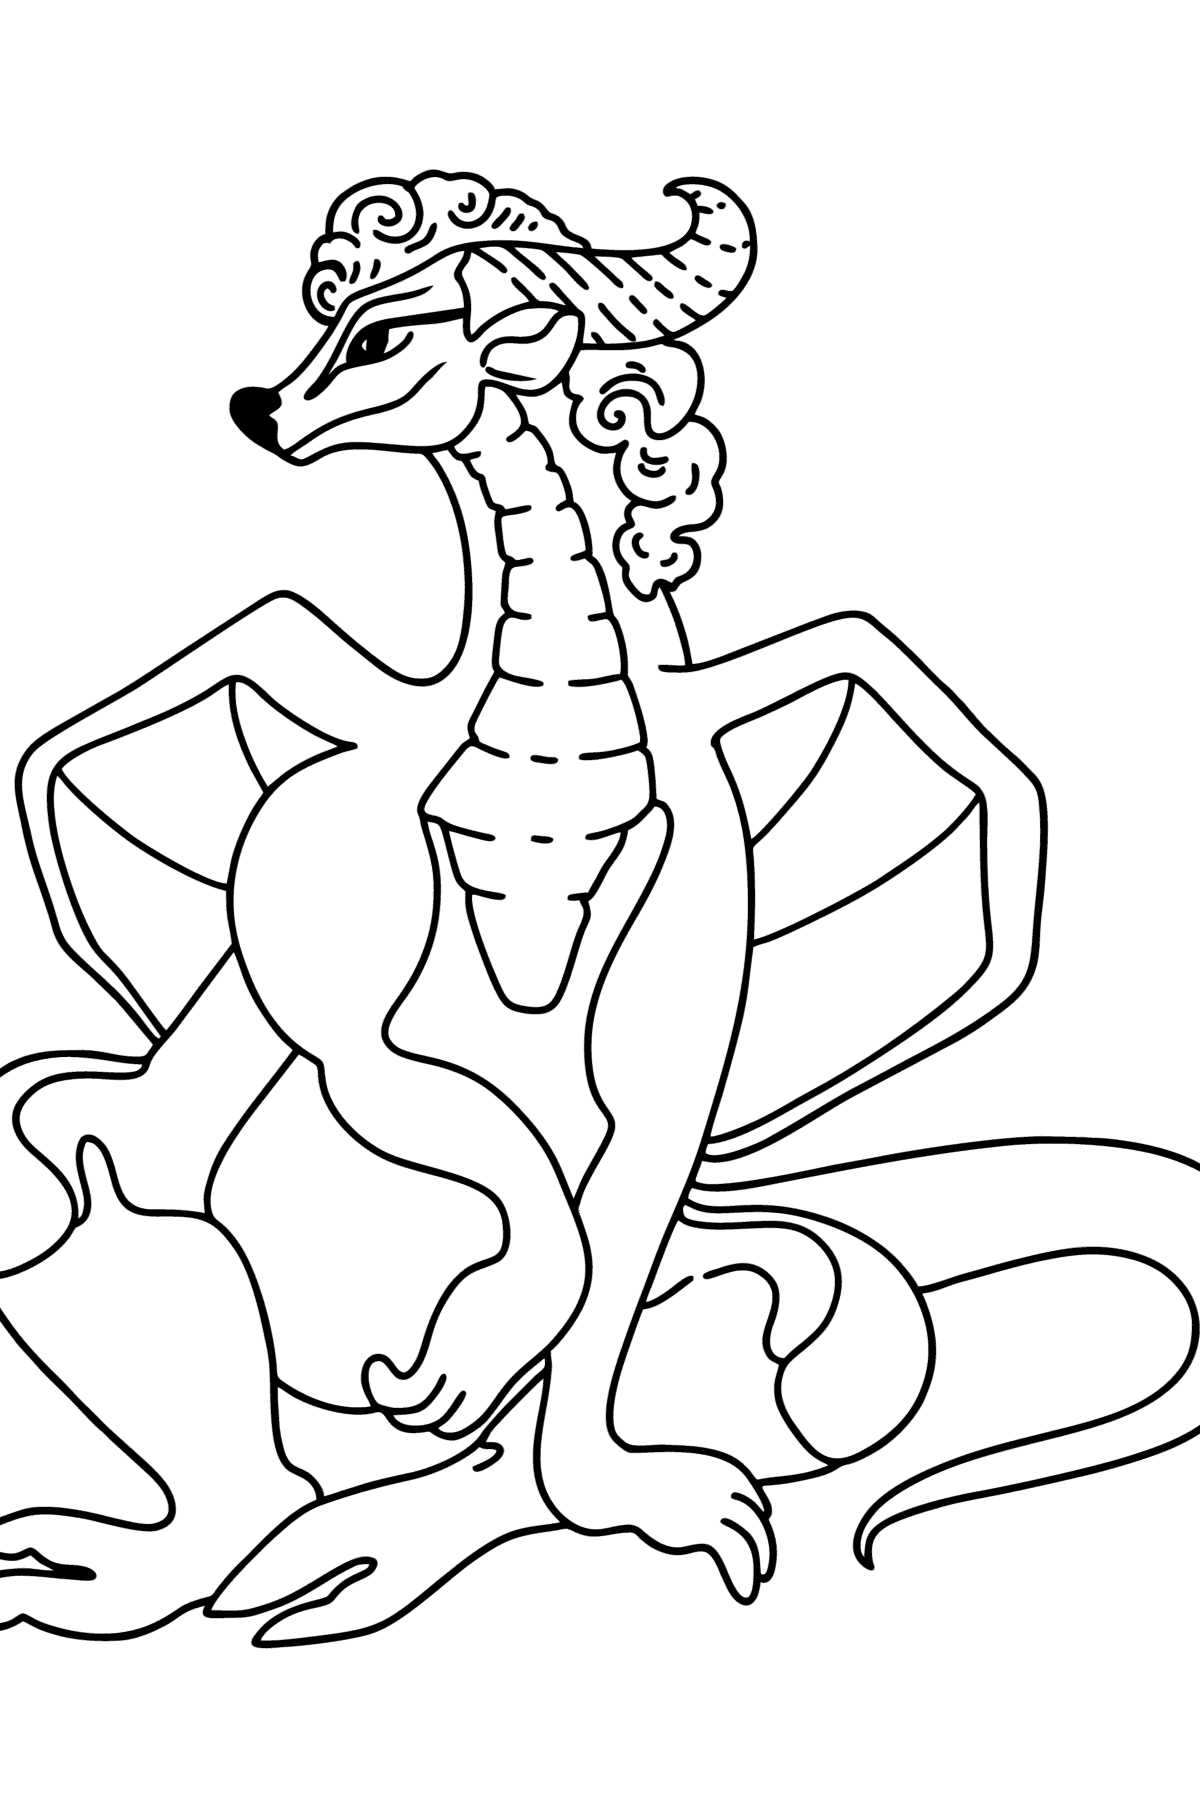 Happy Dragon coloring page - Coloring Pages for Kids